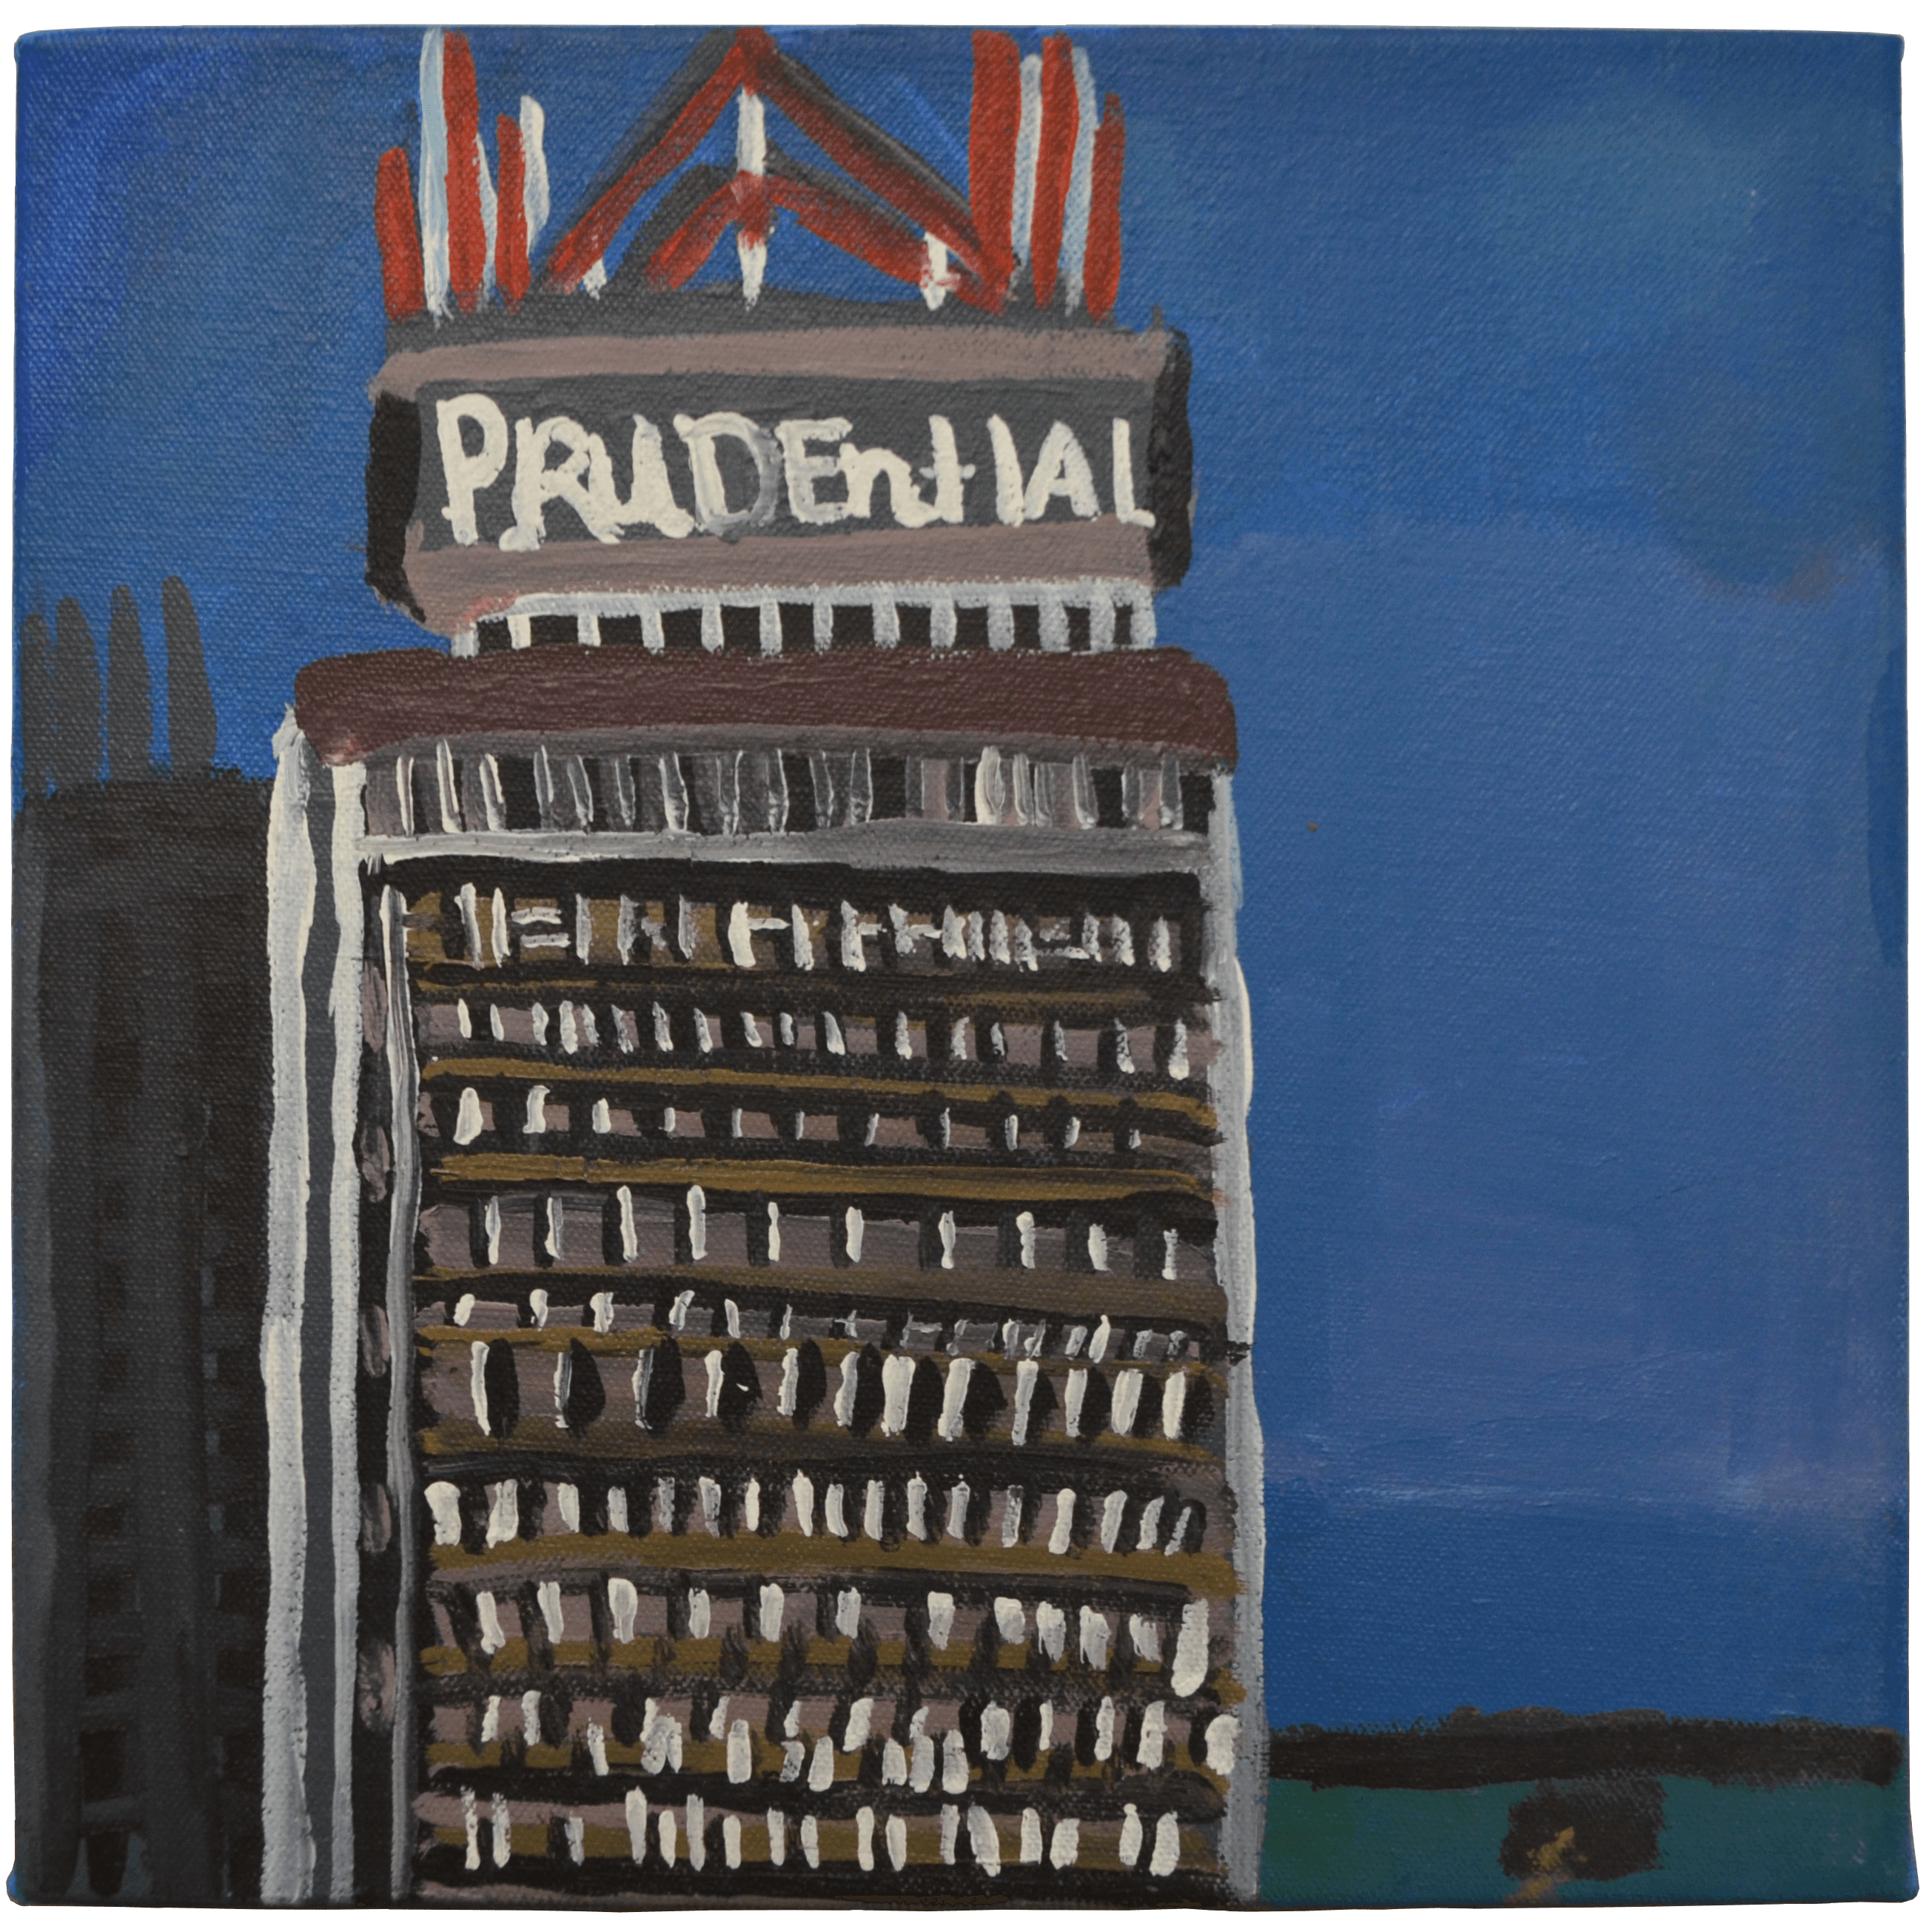 Prudential by Patrick Shea